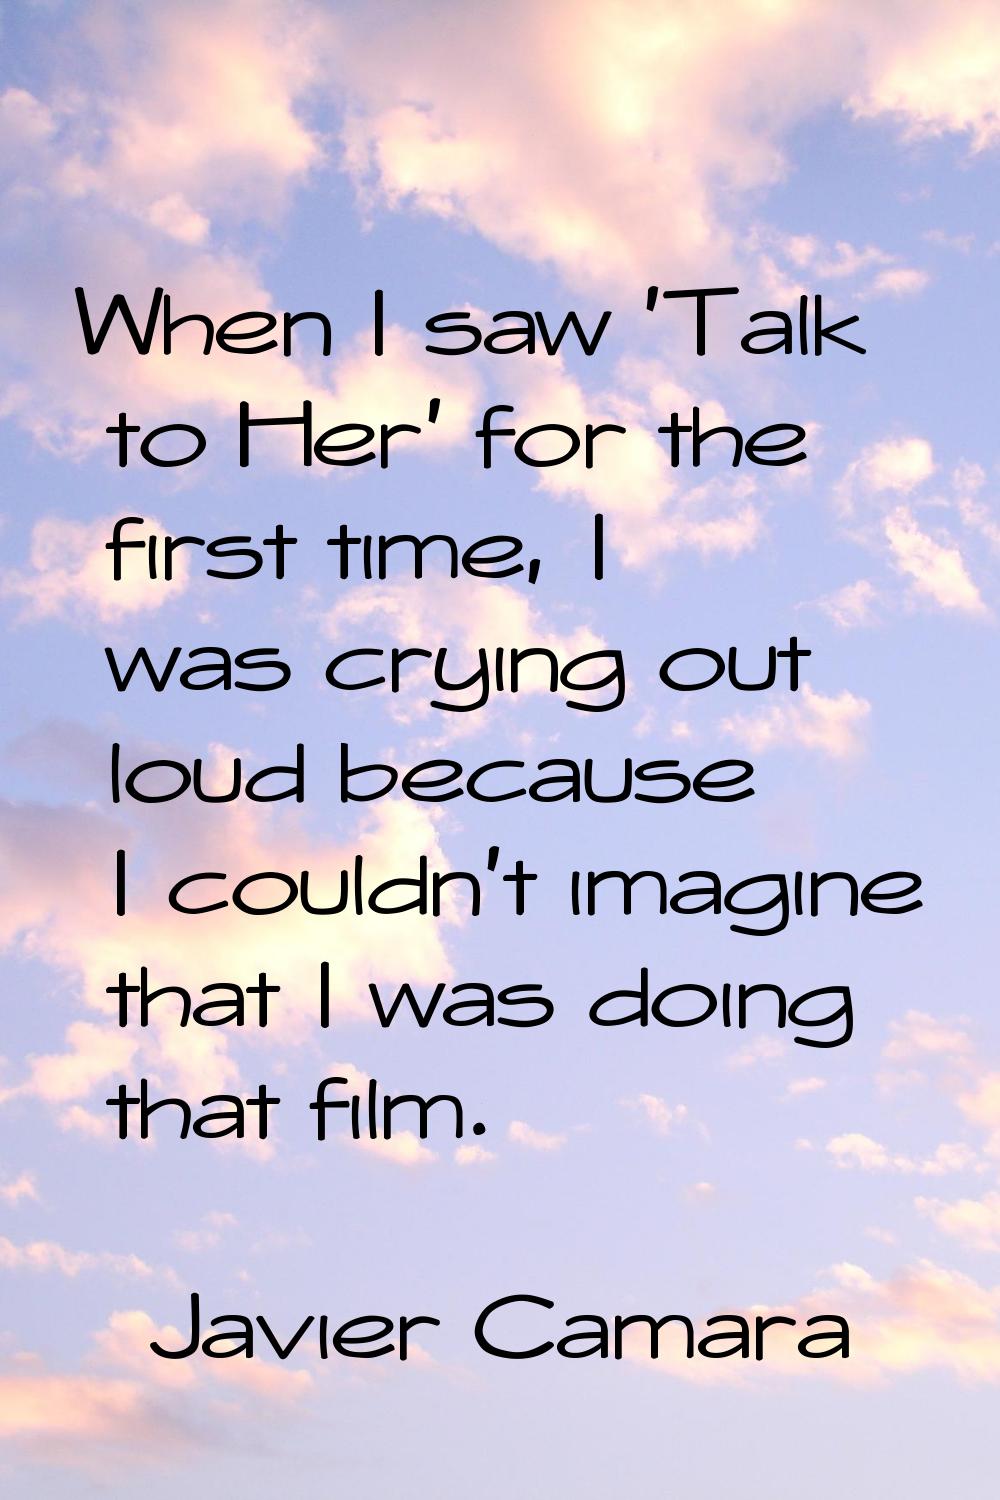 When I saw 'Talk to Her' for the first time, I was crying out loud because I couldn't imagine that 